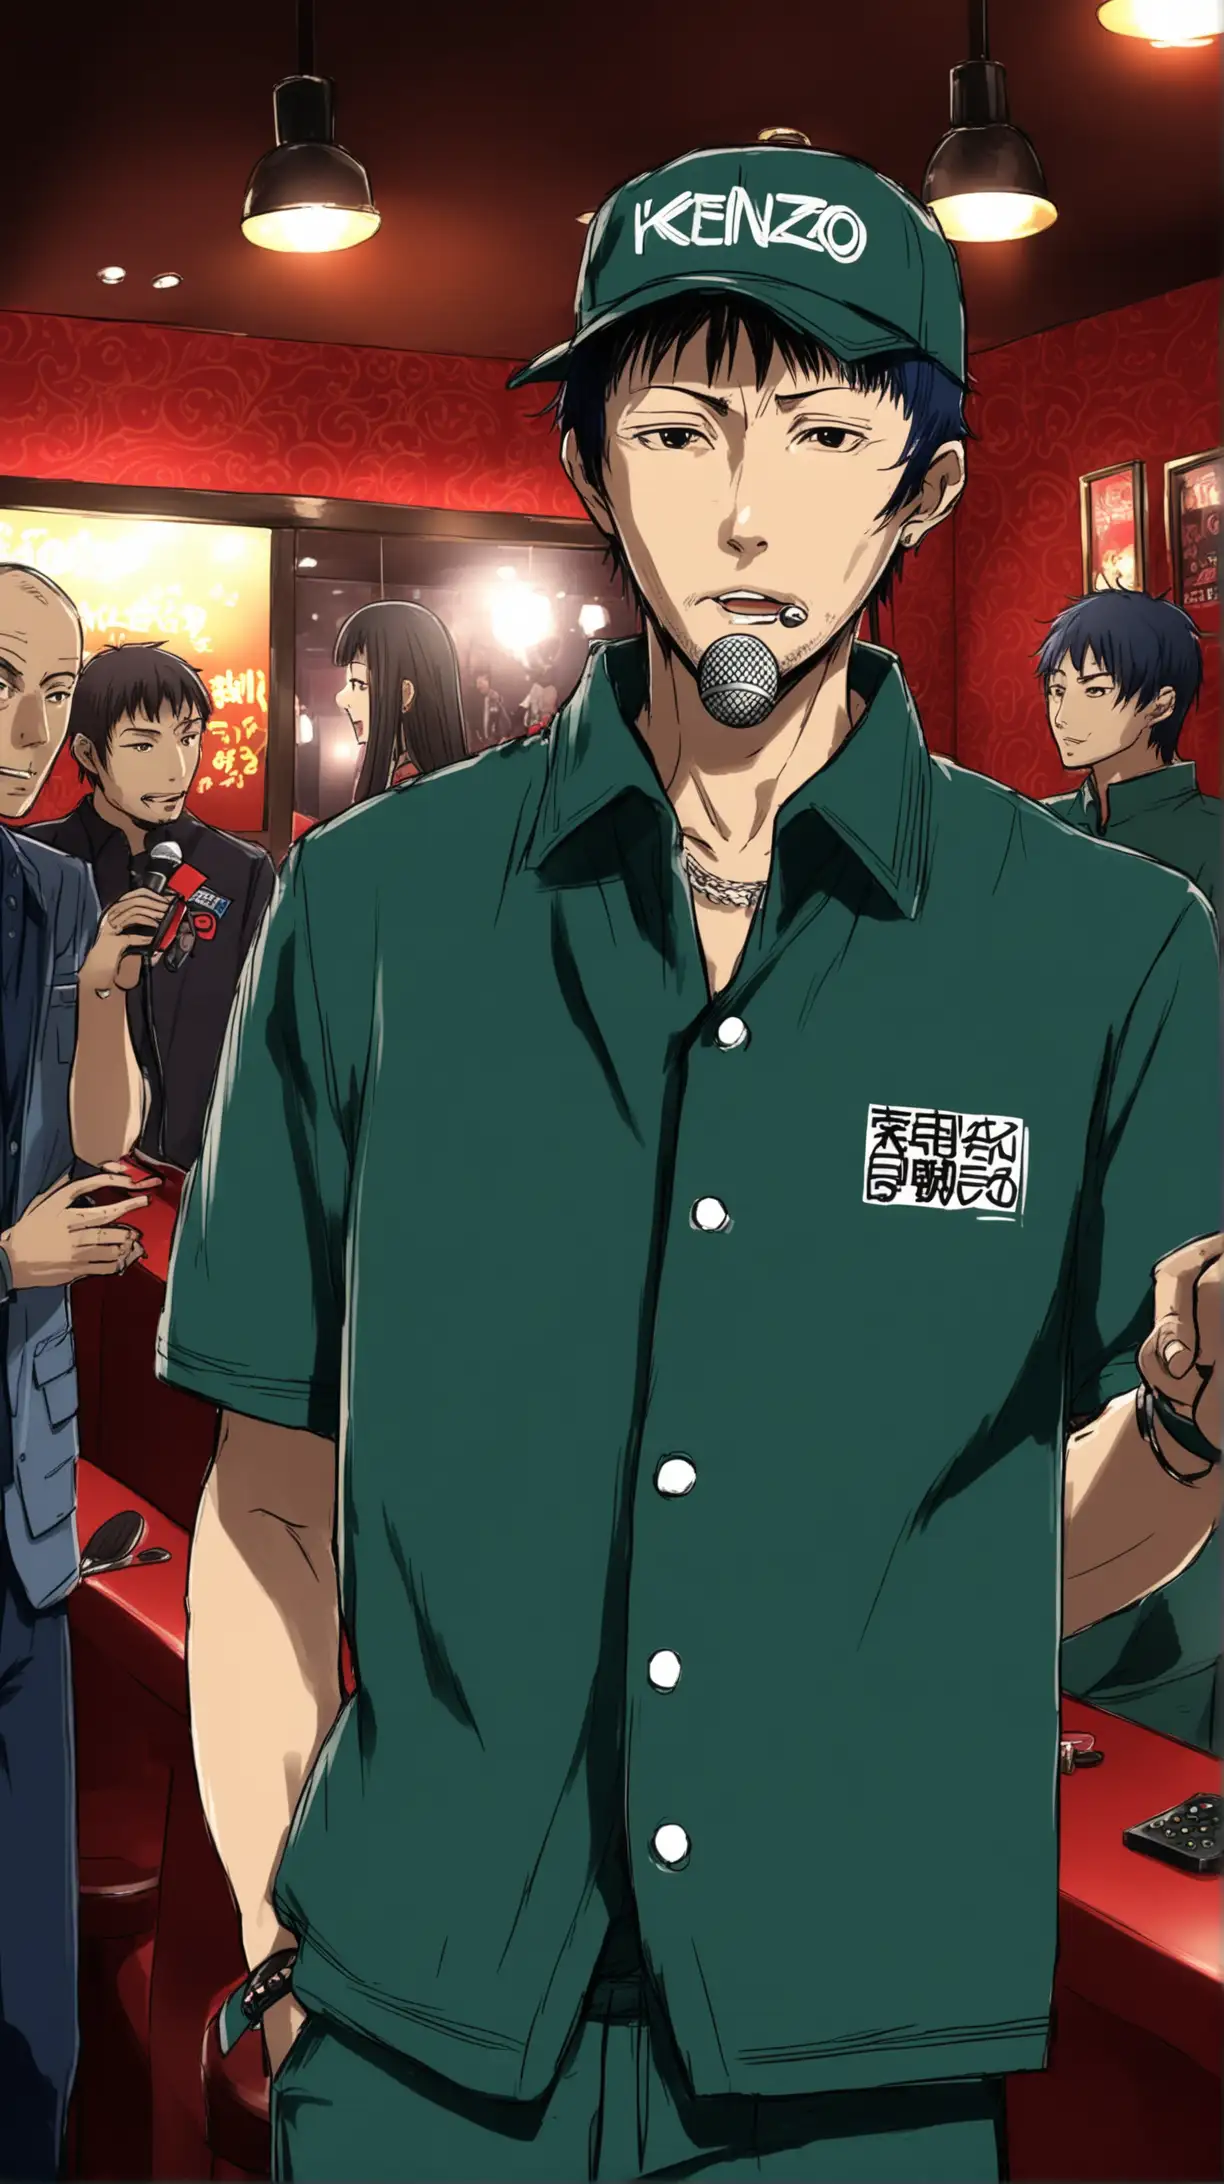 In a karaoke bar, Kenzo, a thin middle aged man, dressed up like a delivery boy, looked around for a thief named Haru.
